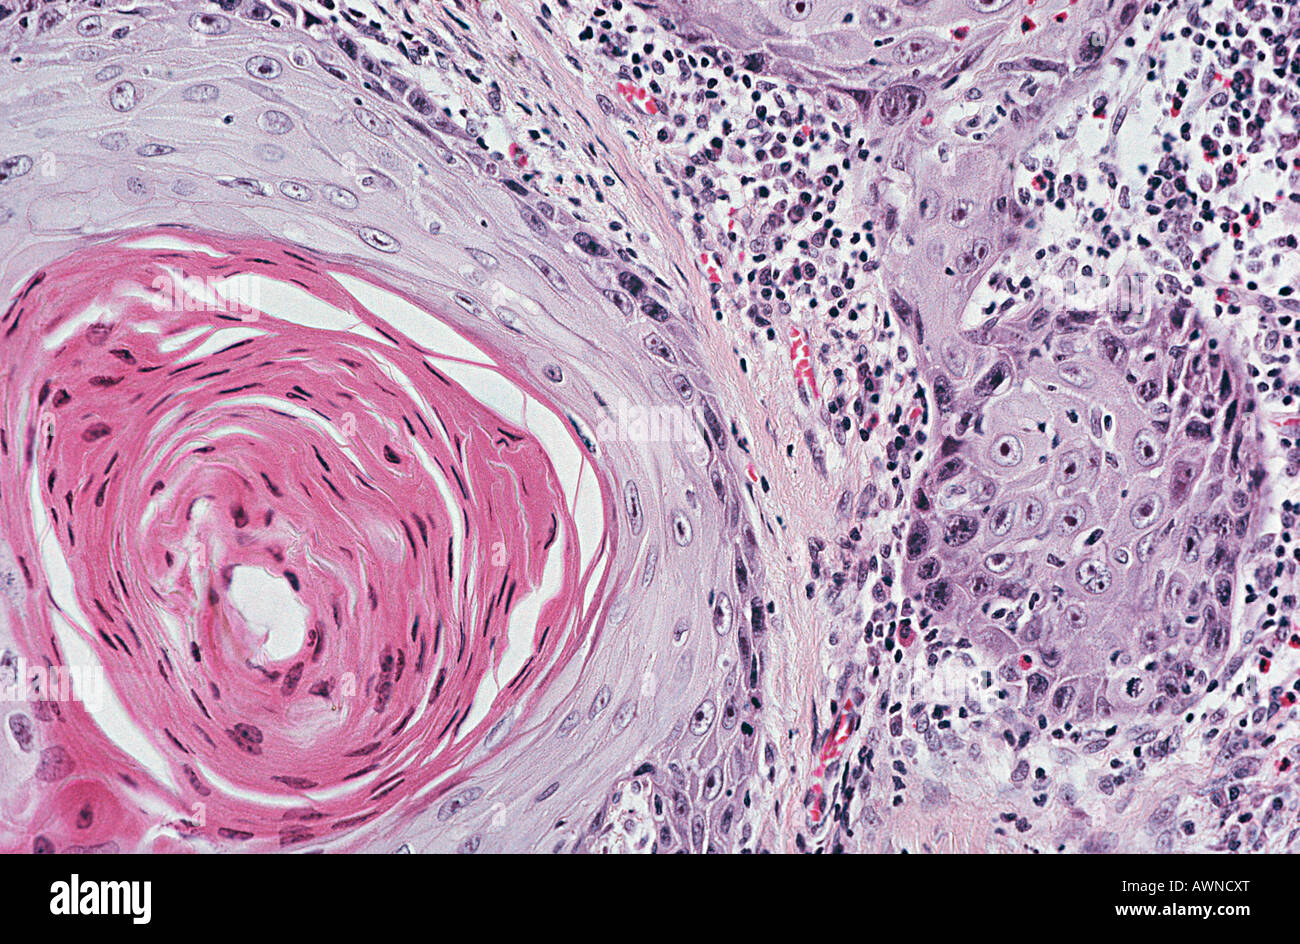 Squamous cell carcinoma Stock Photo